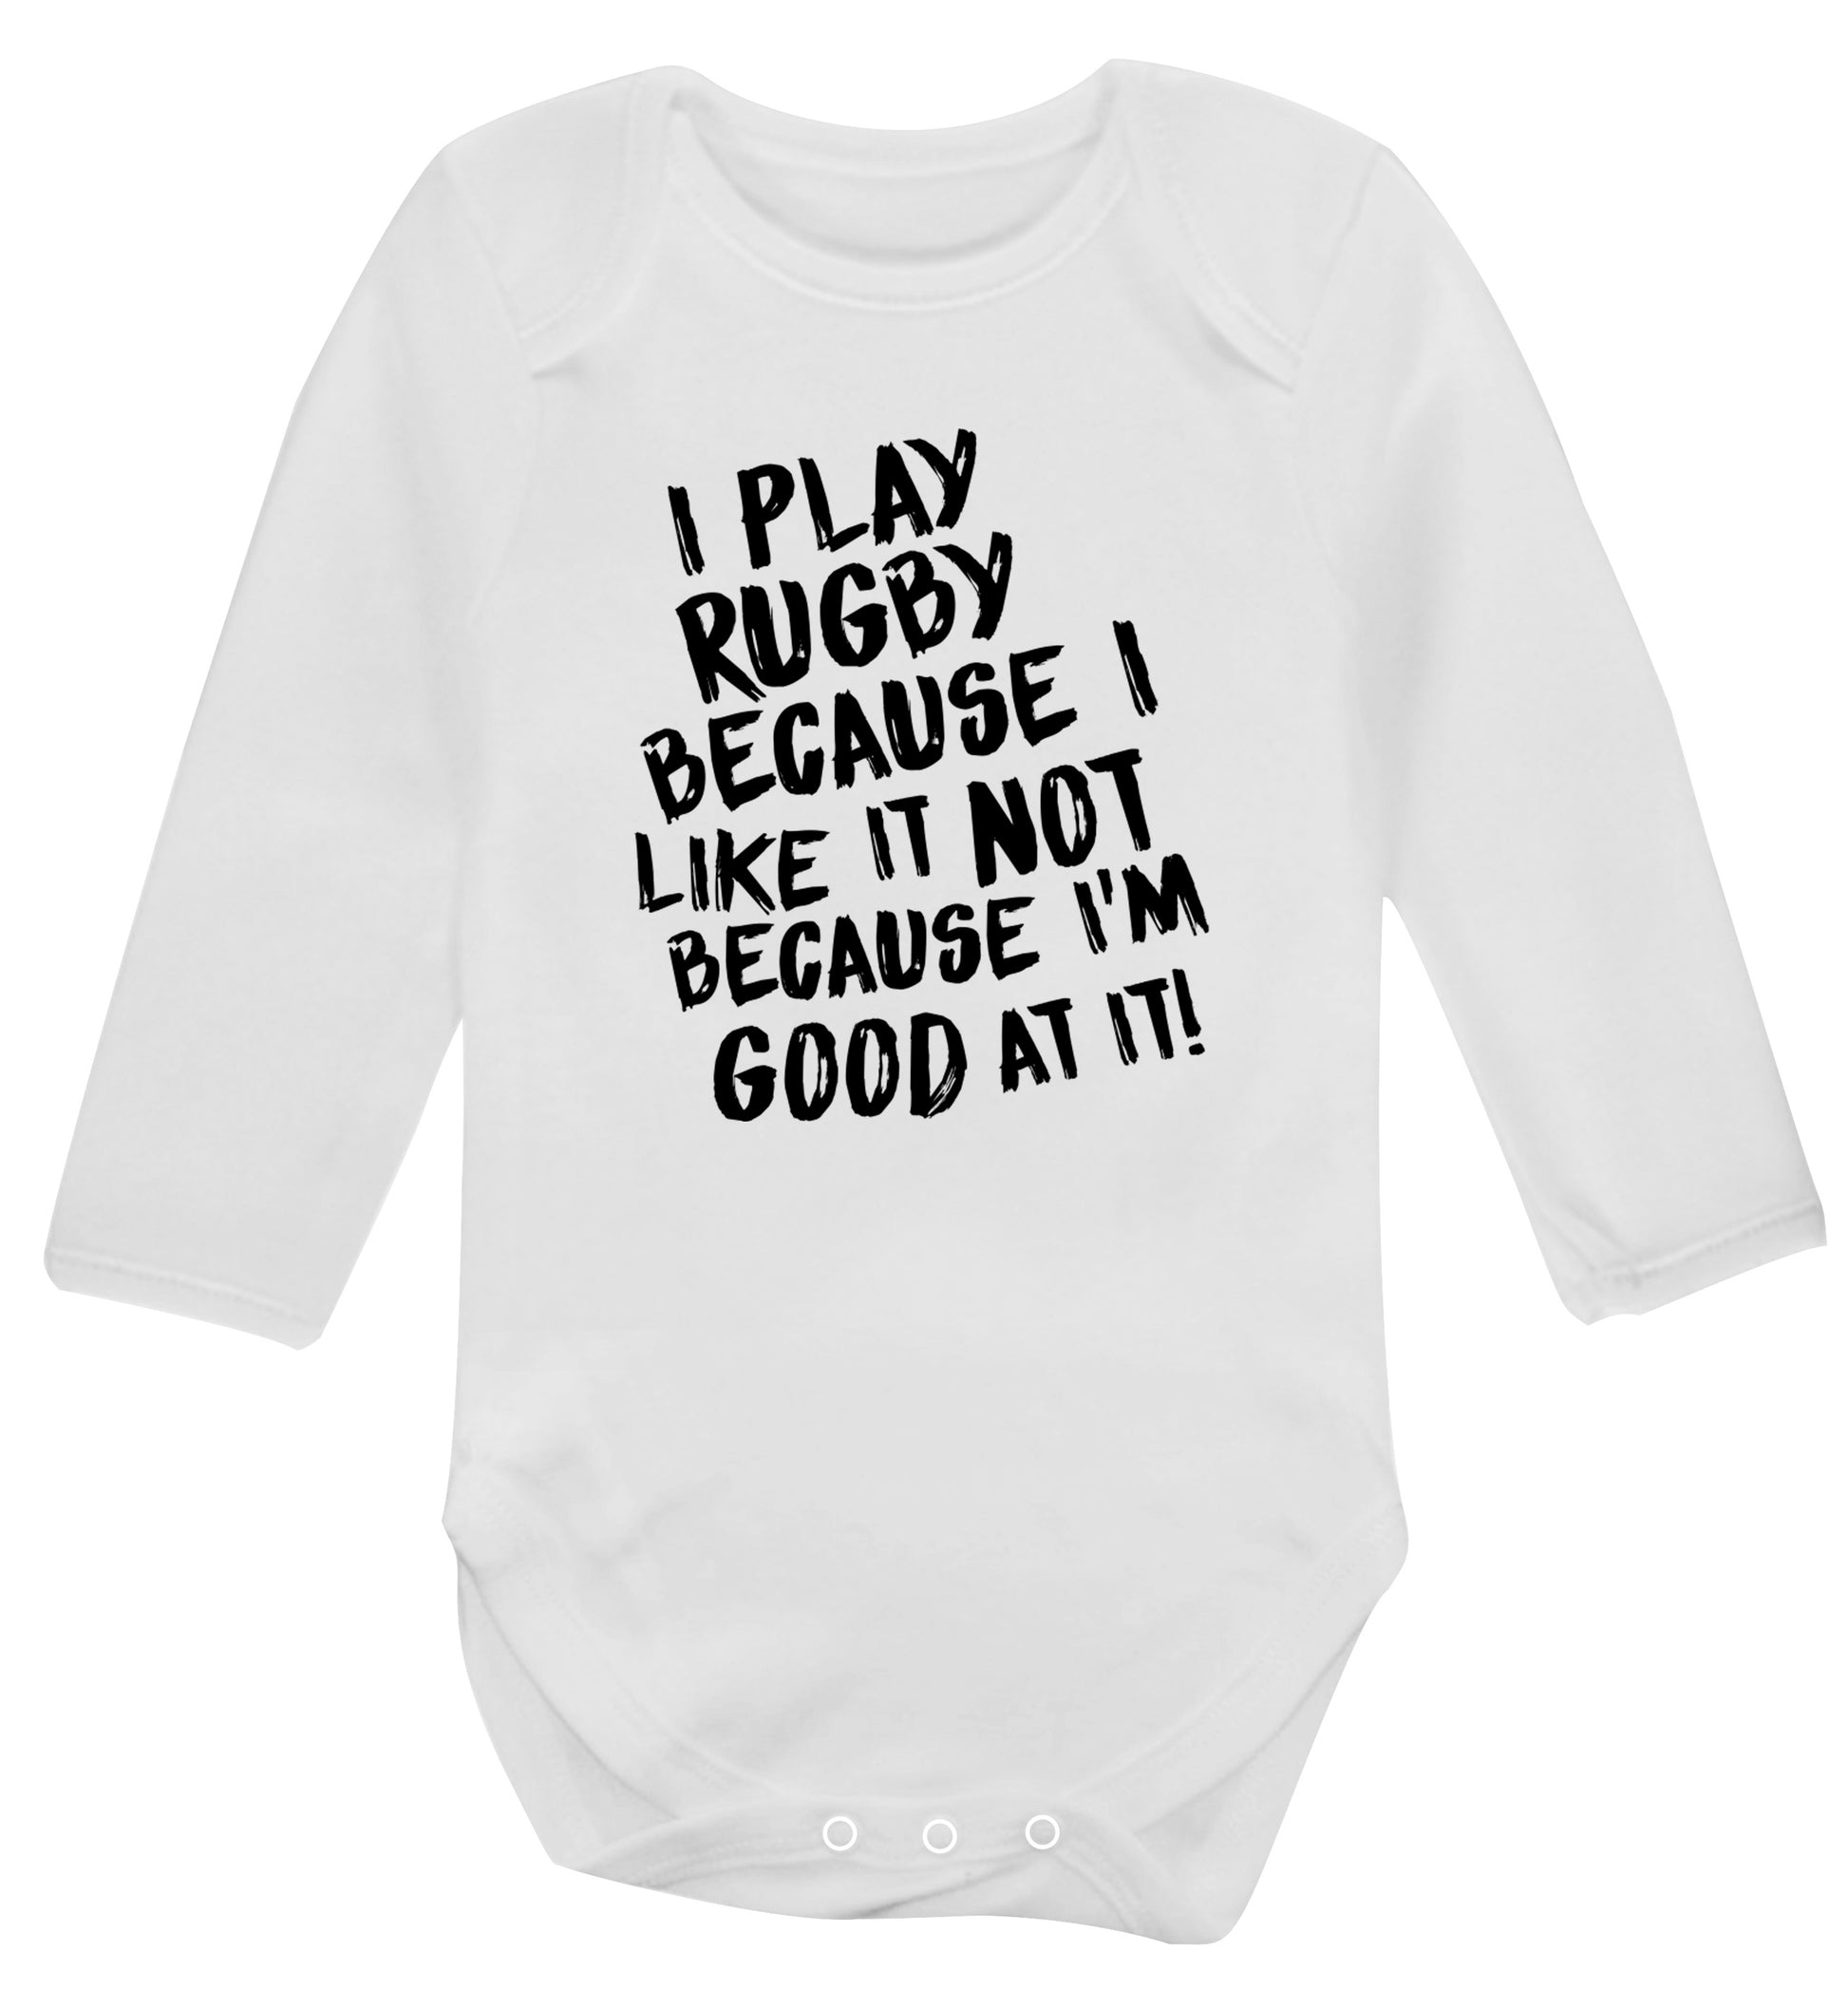 I play rugby because I like it not because I'm good at it Baby Vest long sleeved white 6-12 months